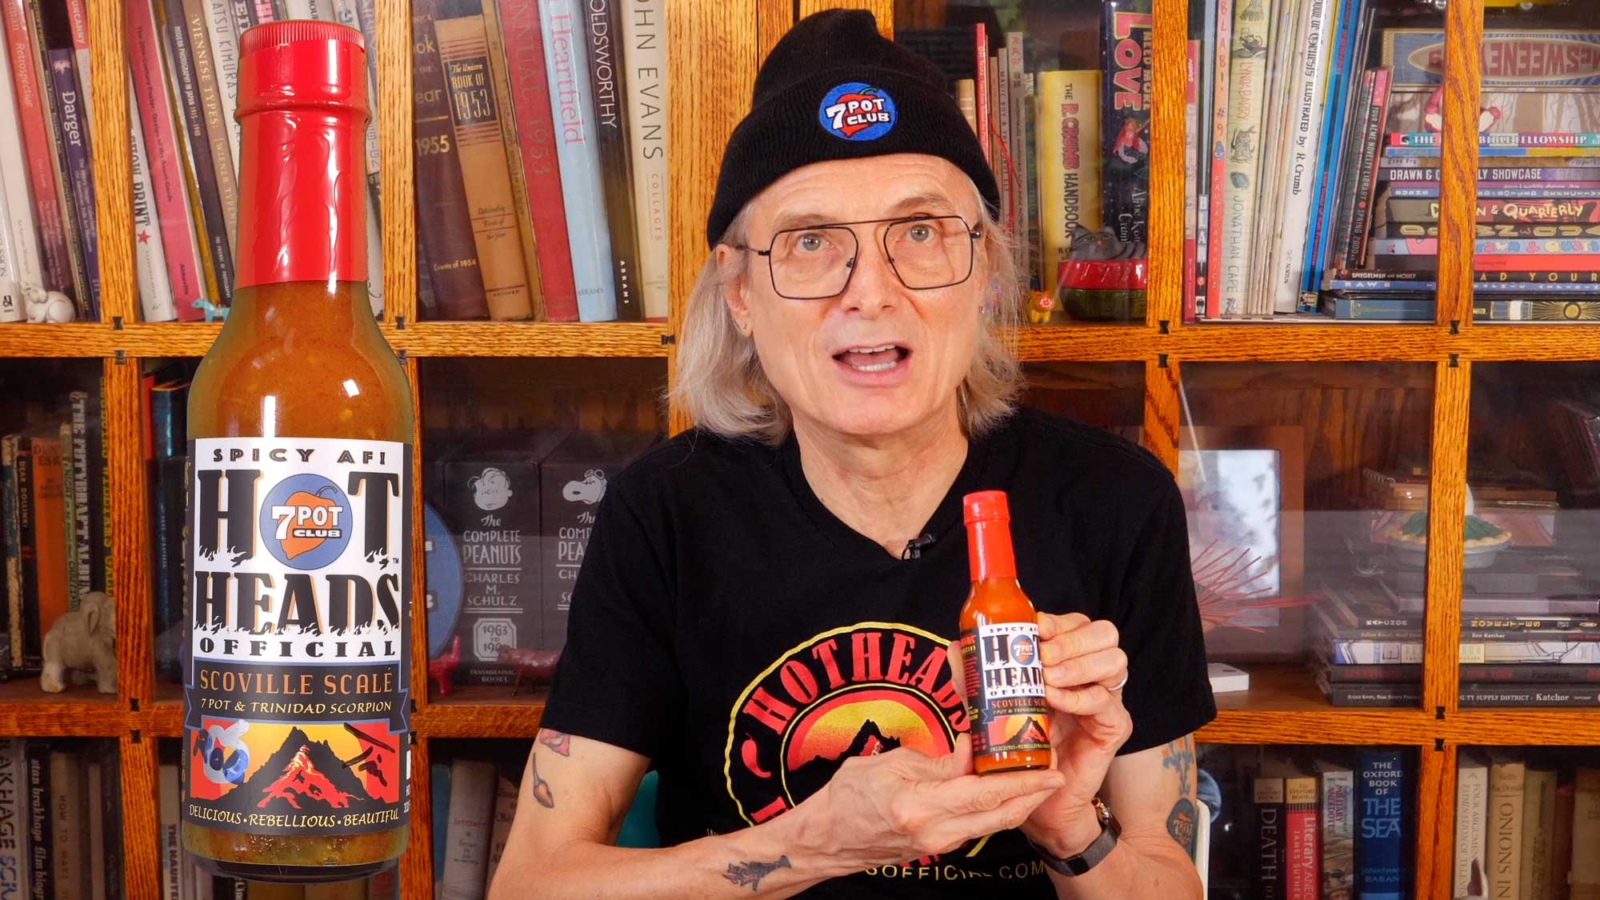 Rob is holding a hot sauce bottle. (still from YouTube video)